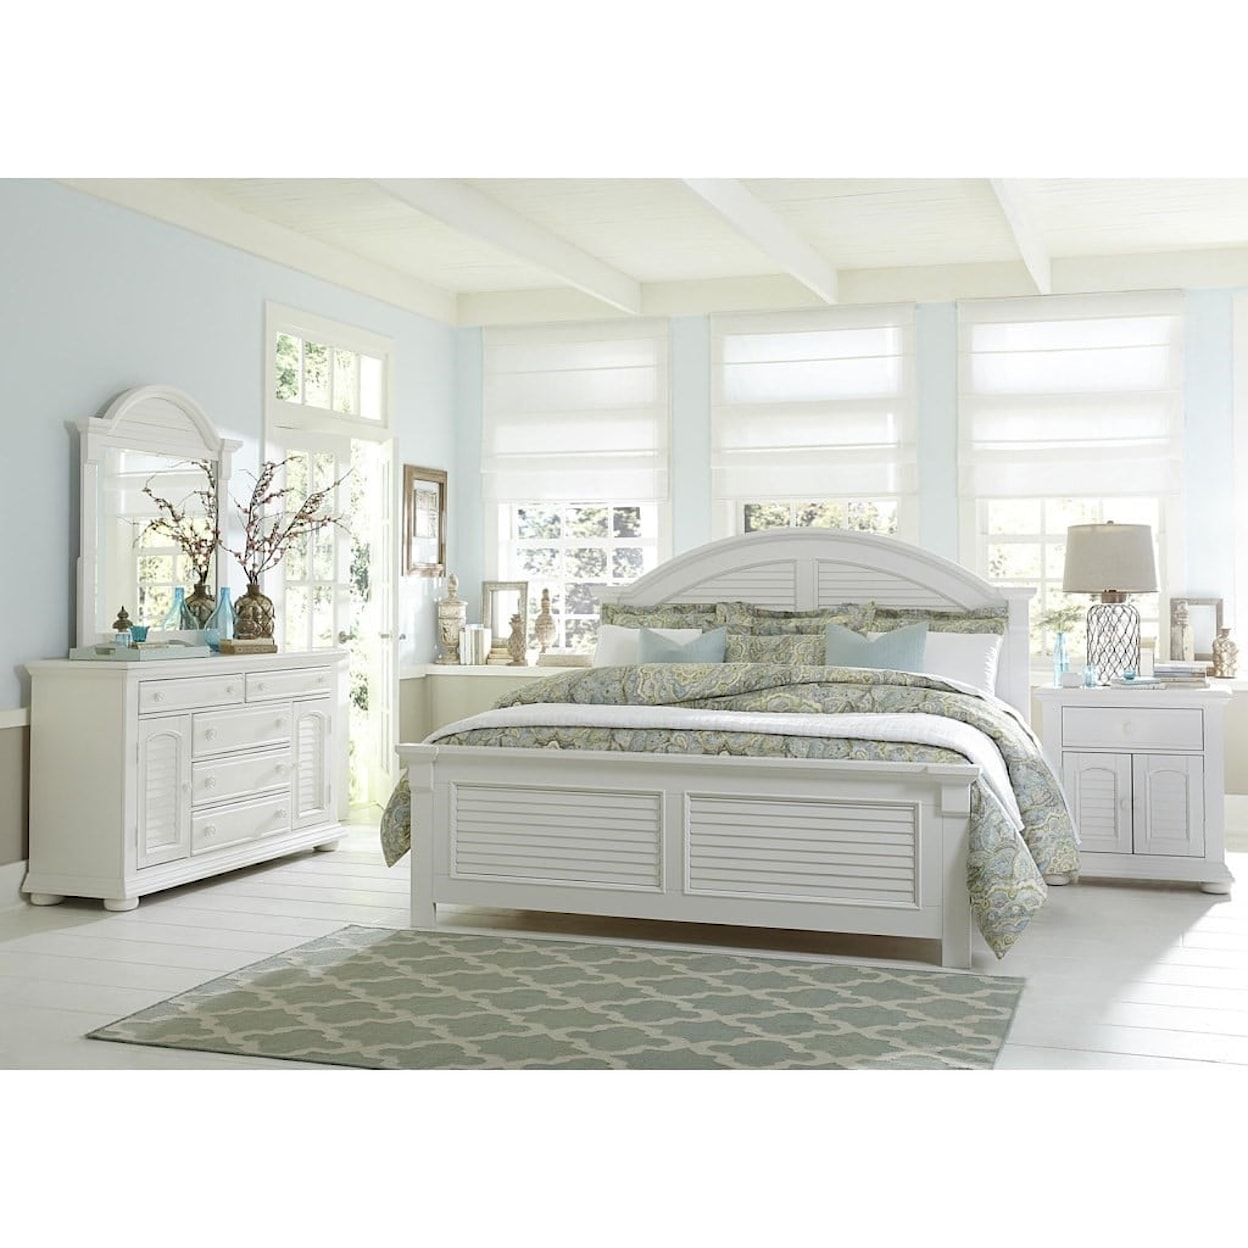 Liberty Furniture Summer House 607 Queen 7pc Bedroom Group